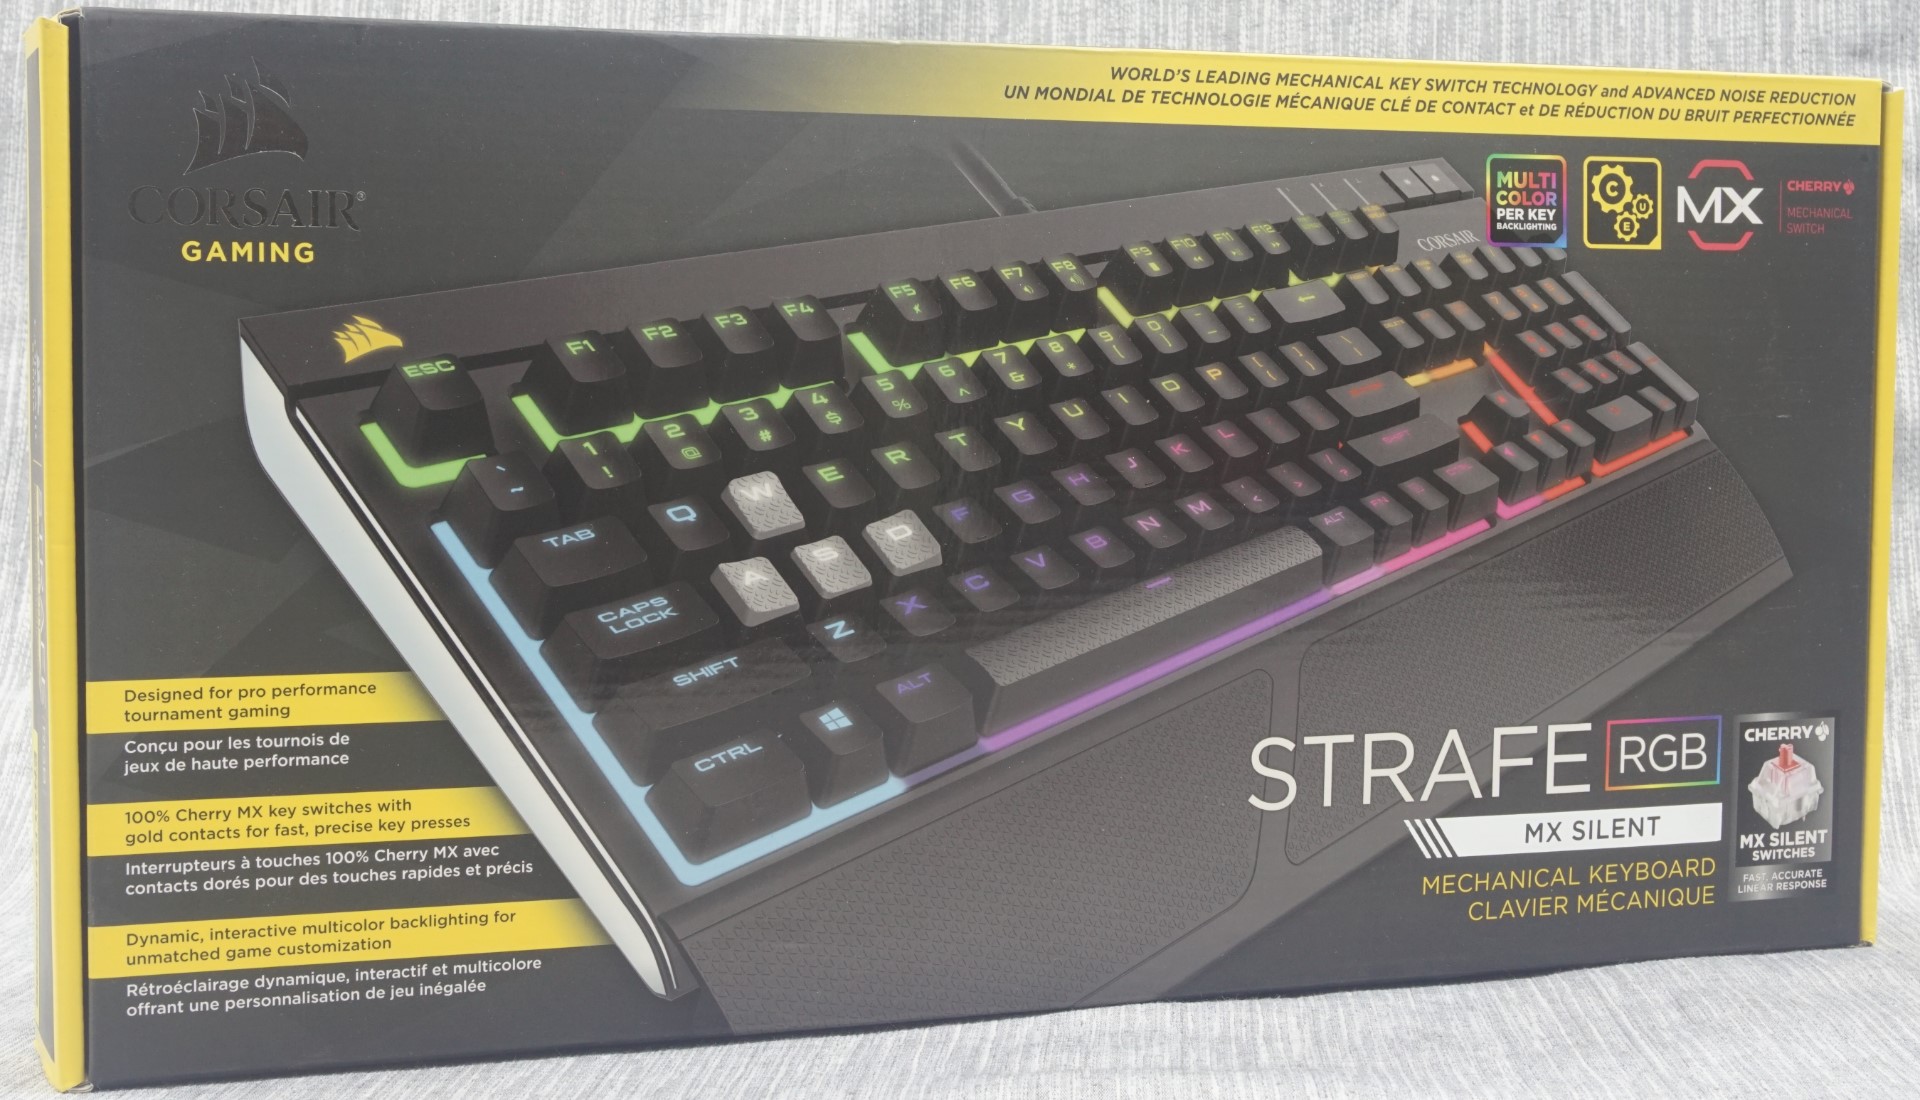 The Corsair Strafe RGB Mechanical Keyboard Review with MX Silent 